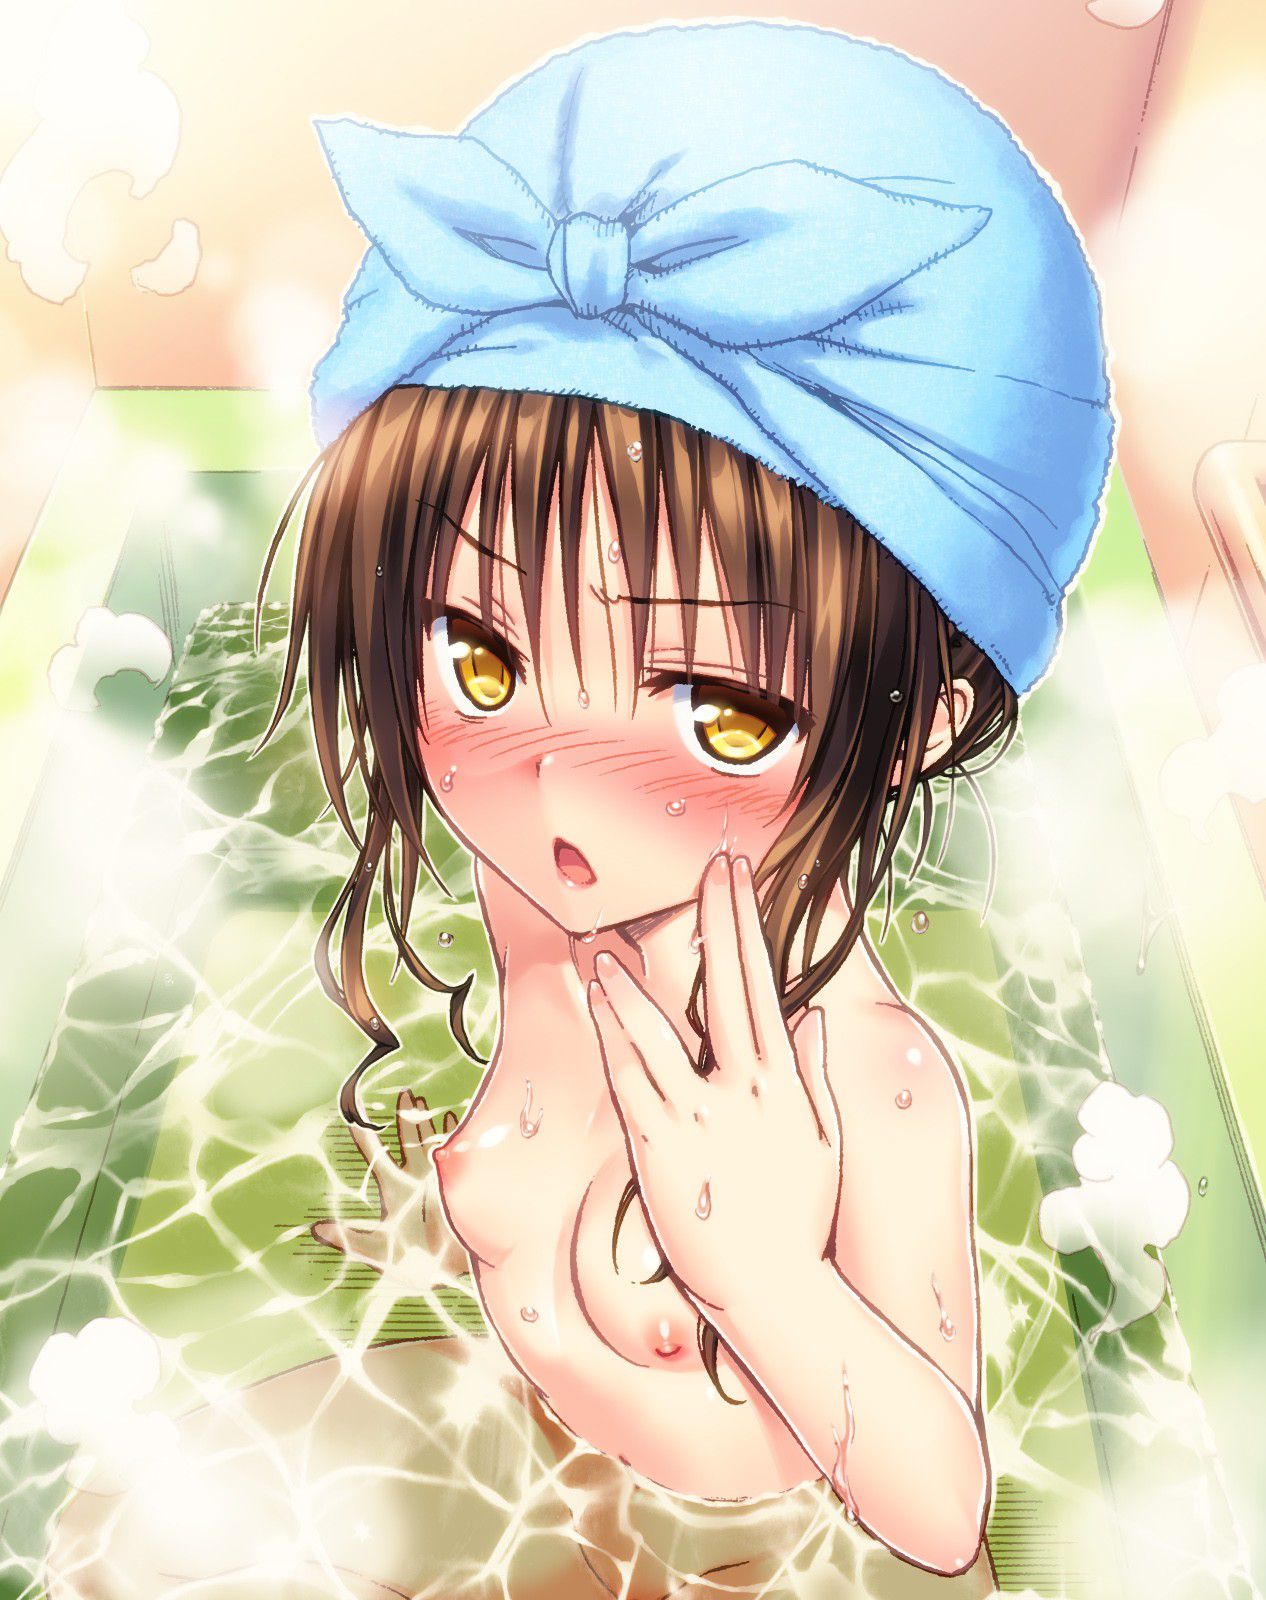 Wwww of the two erotic images of the vine Loli 6